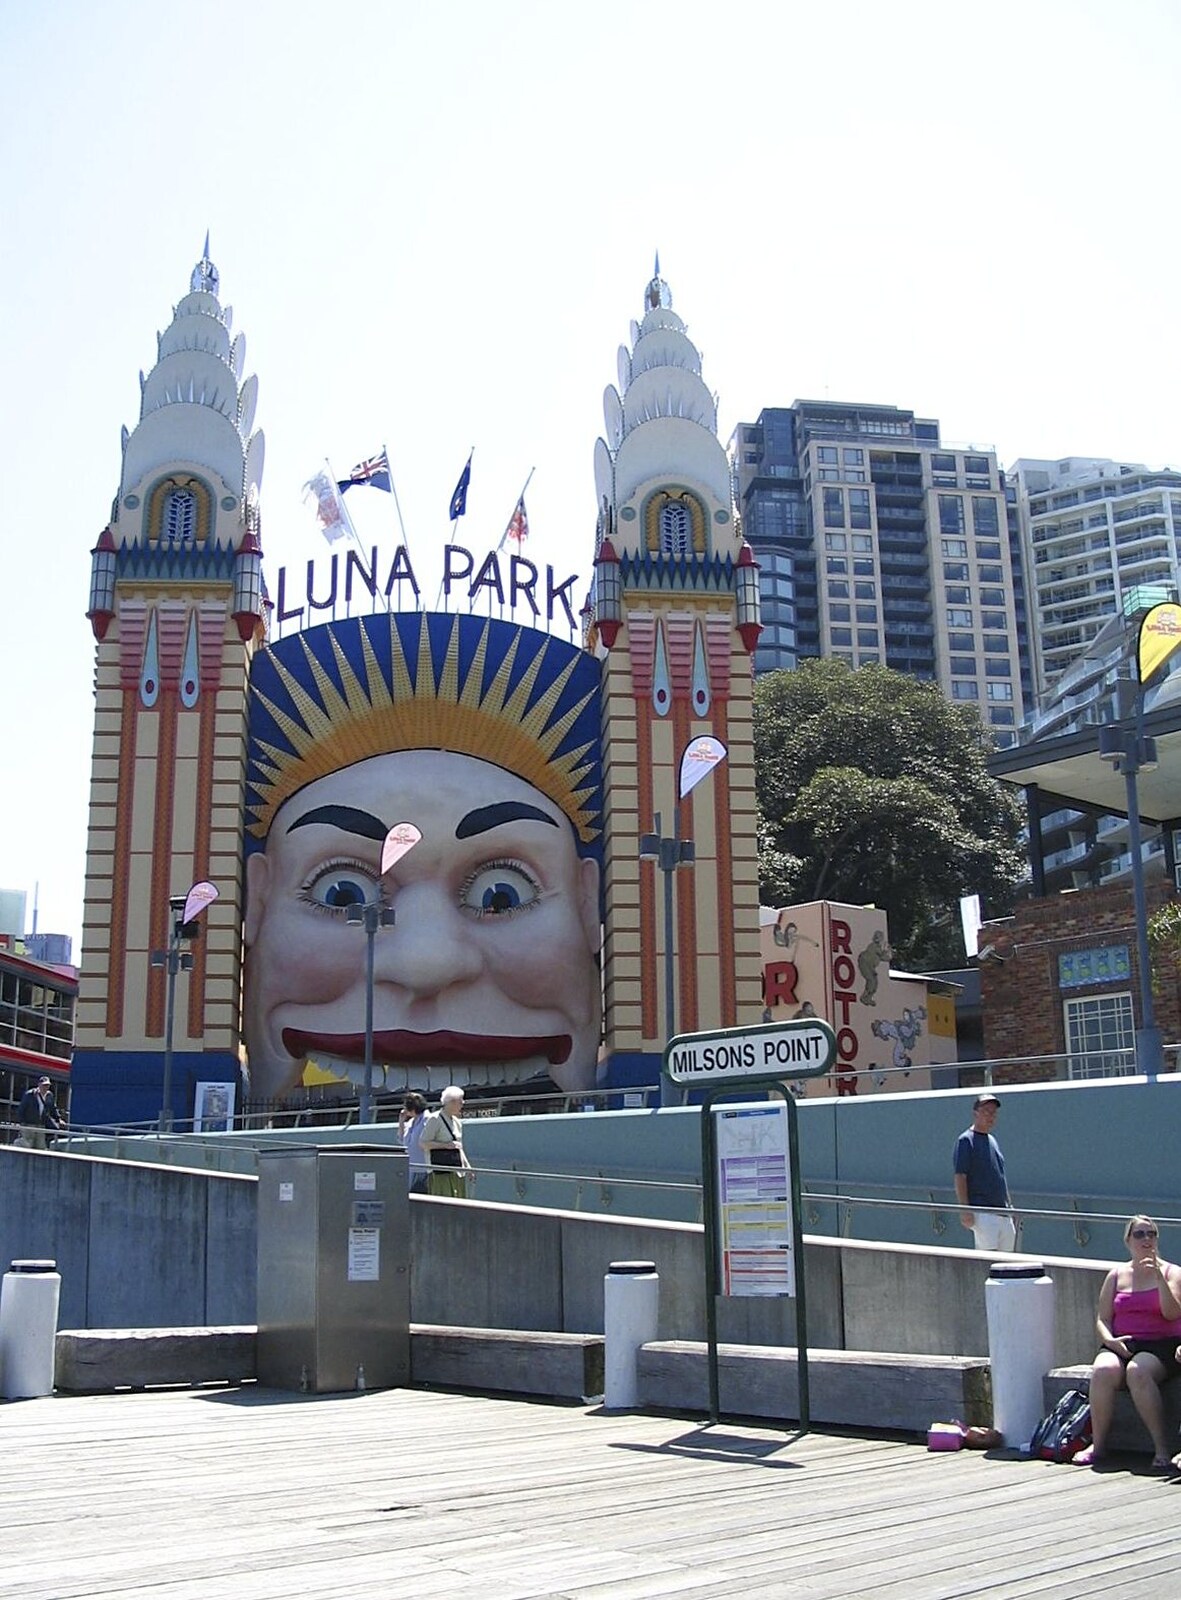 The entrance to Luna Park from Sydney, New South Wales, Australia - 10th October 2004